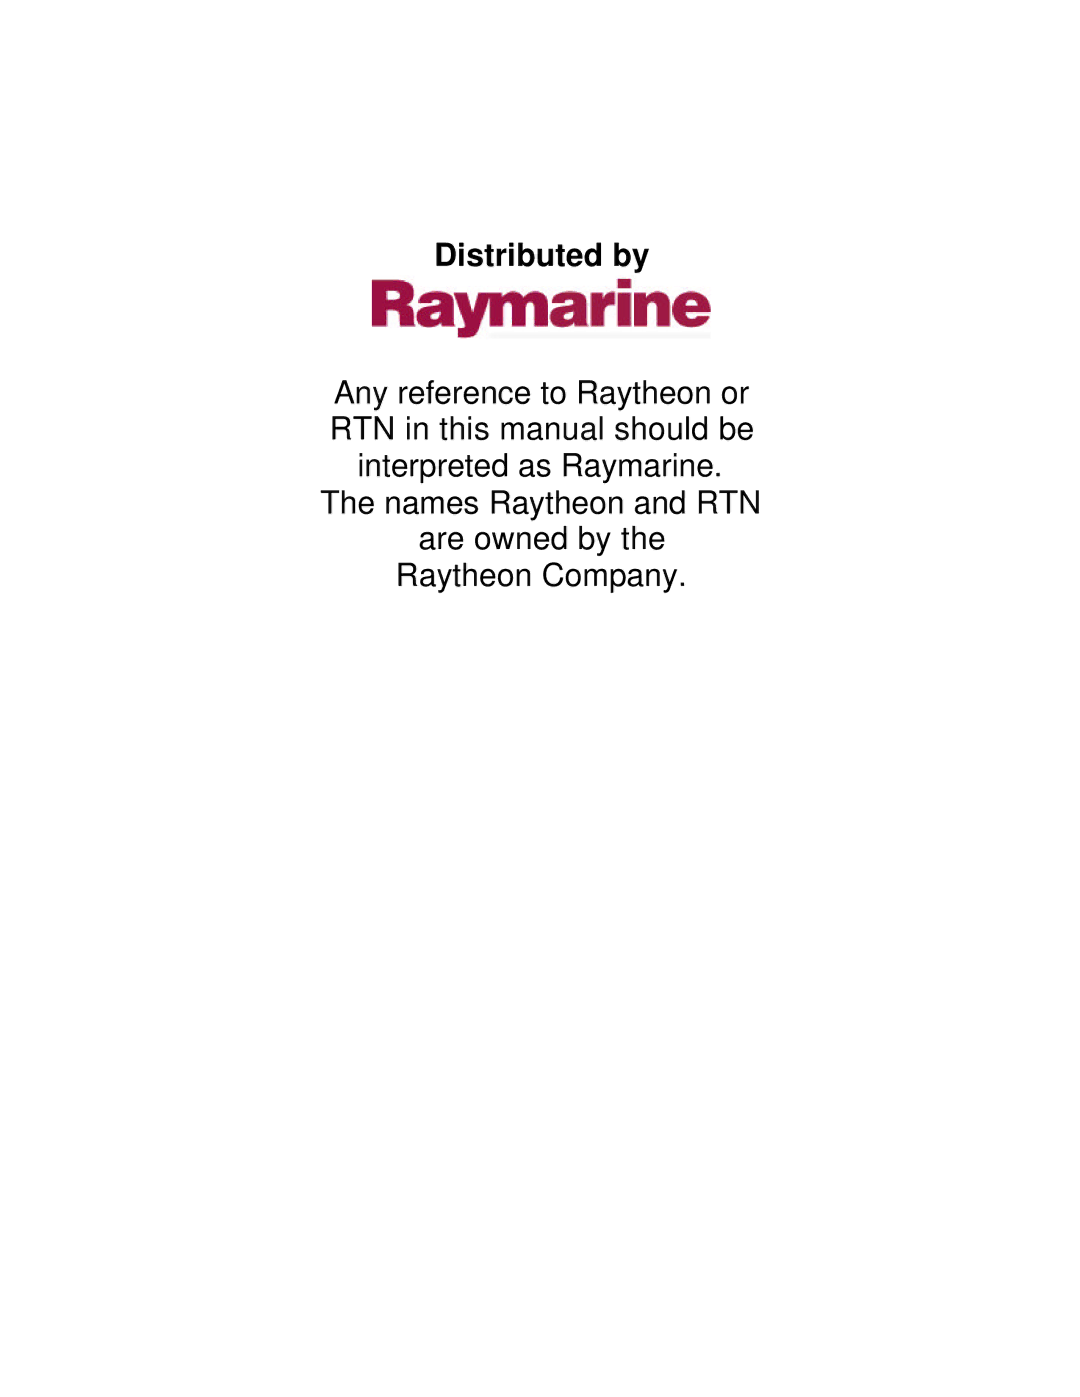 Raymarine L265 manual Distributed by 